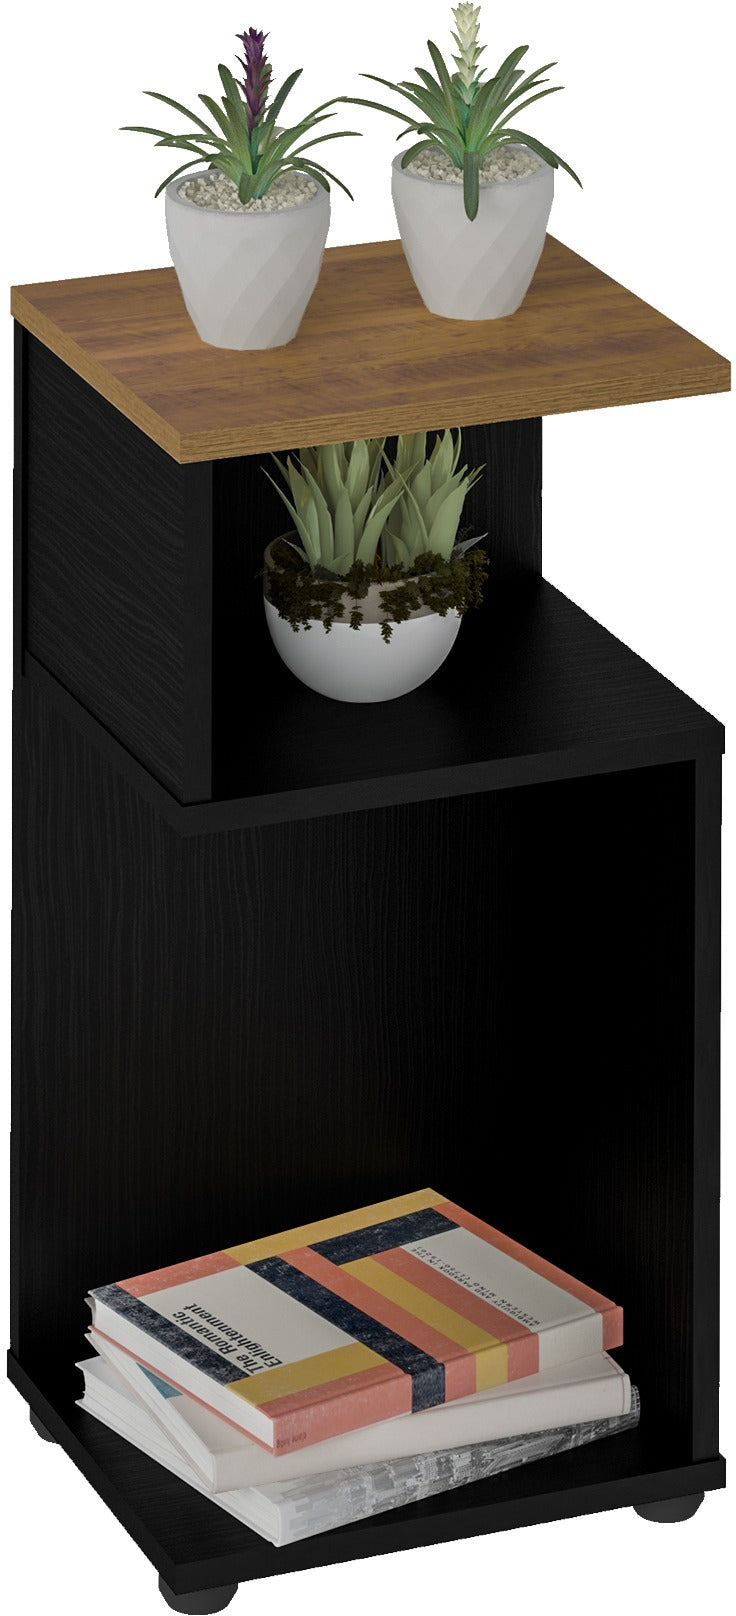 NAPLES-PLANT-STAND-SIDE-TABLE-BLACK-AND-PINE-EFFECT-300-302-053-2.jpg